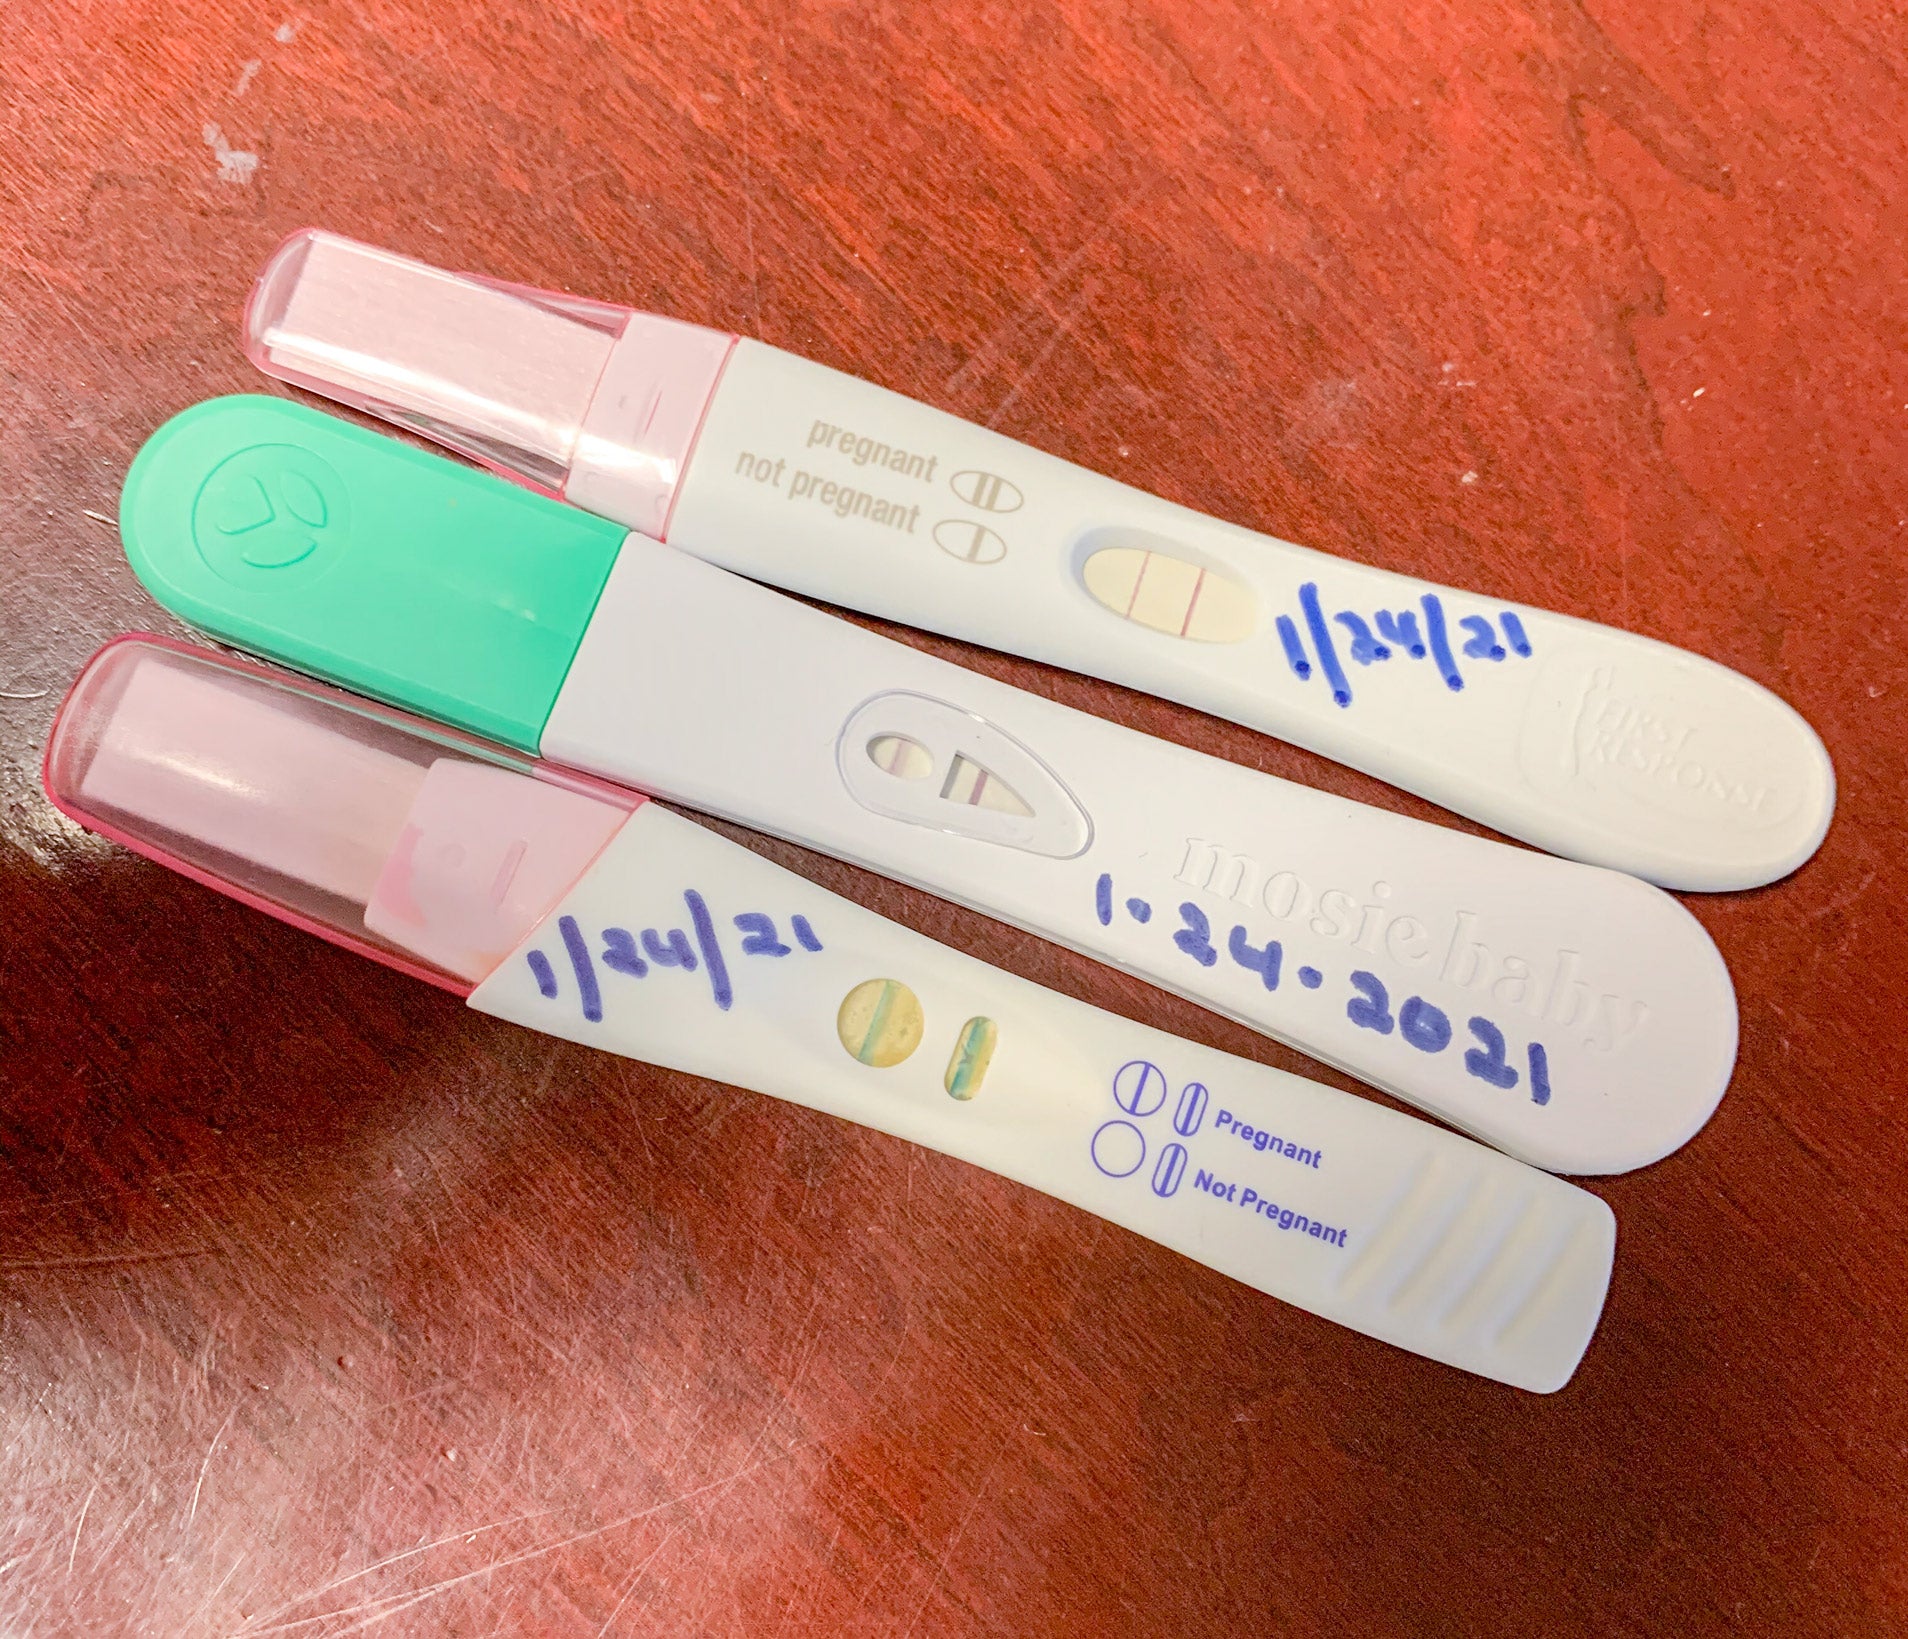 Three positive pregnancy tests, two pink ones and a Mosie pregnancy test with dates written in marker on top of each.